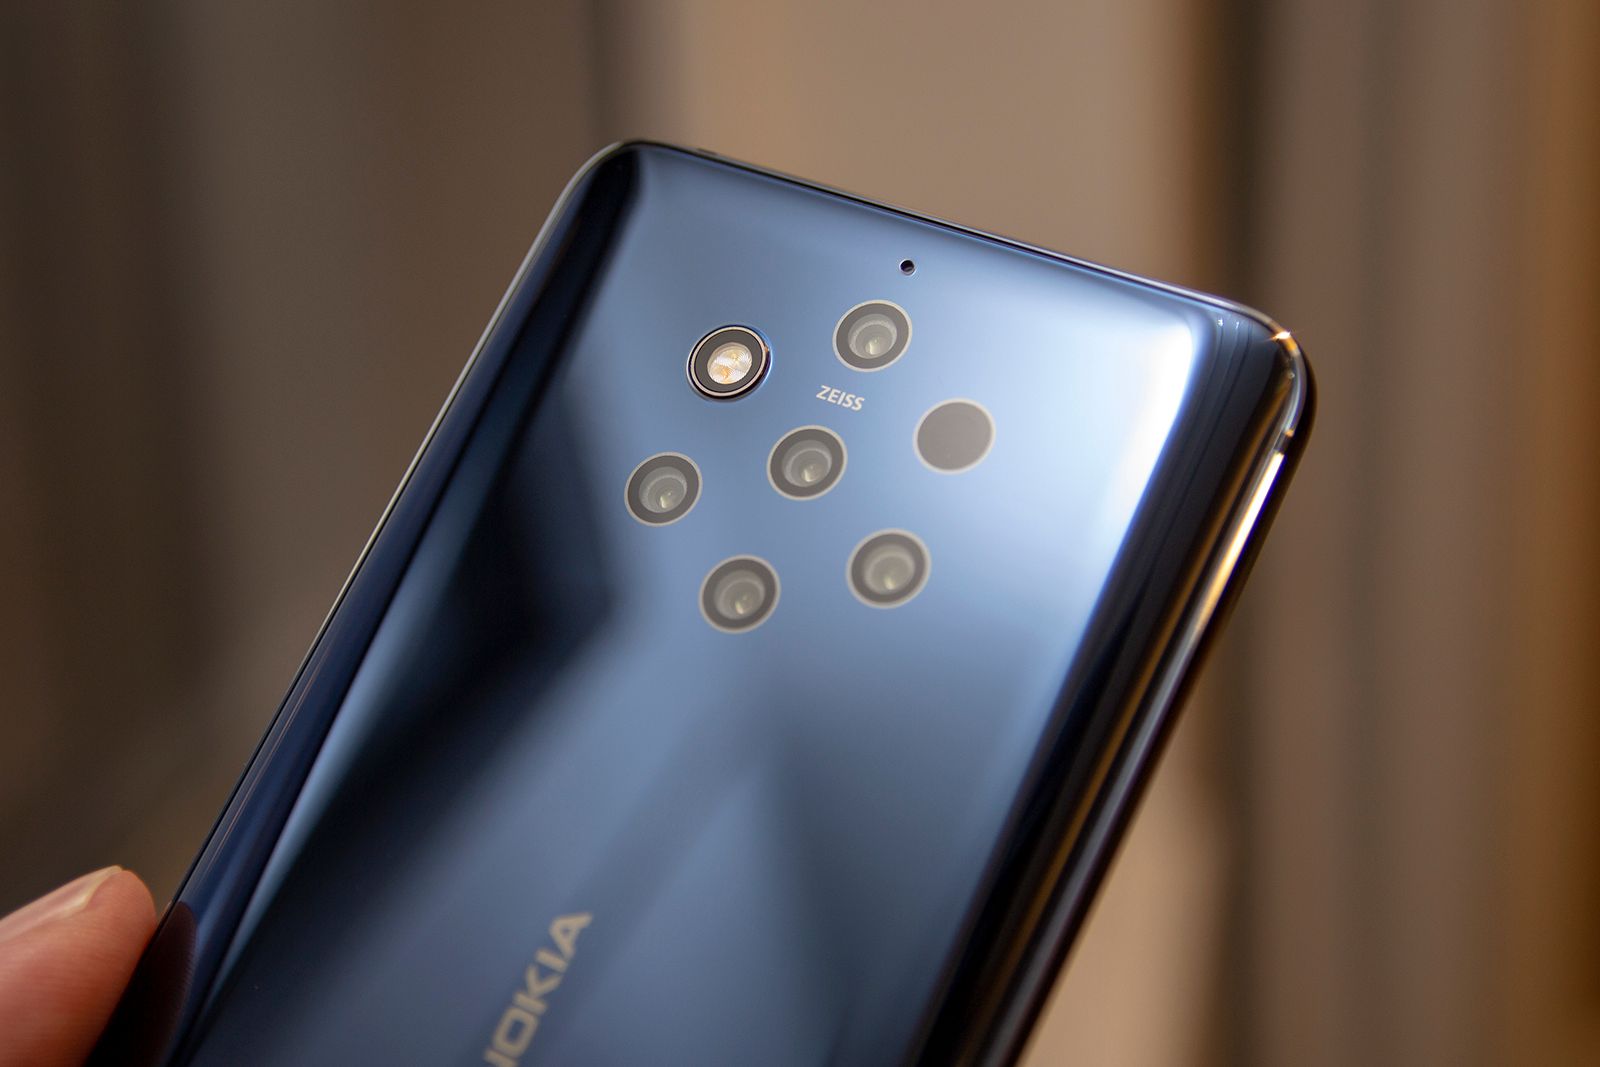 dual triple quad camera smartphones the history running through to the samsung galaxy s10 photo 4